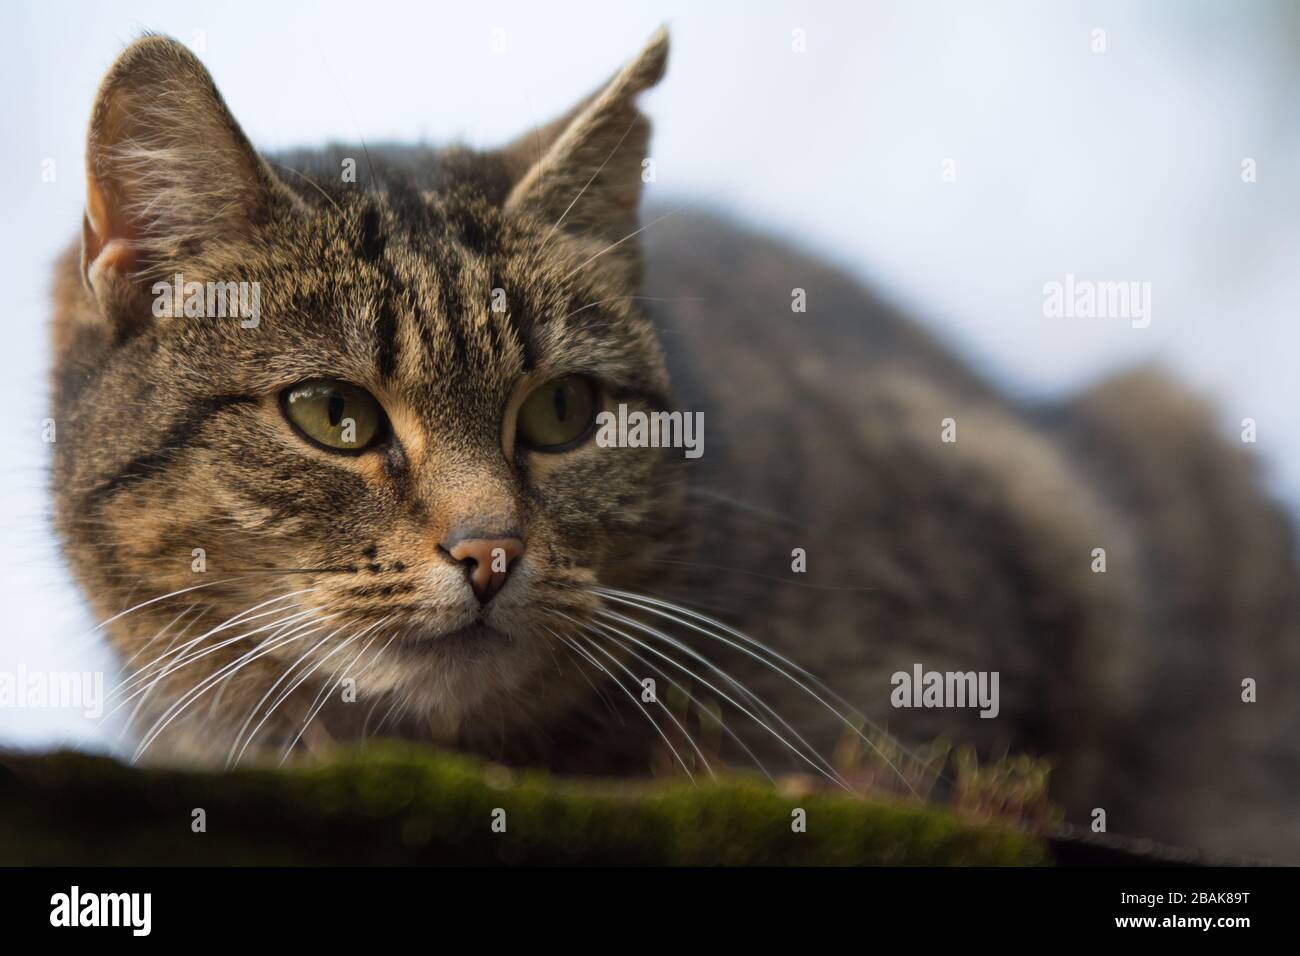 Close-up of a sprayed tabby cat with incision scar on her ear looking right - copy space Stock Photo